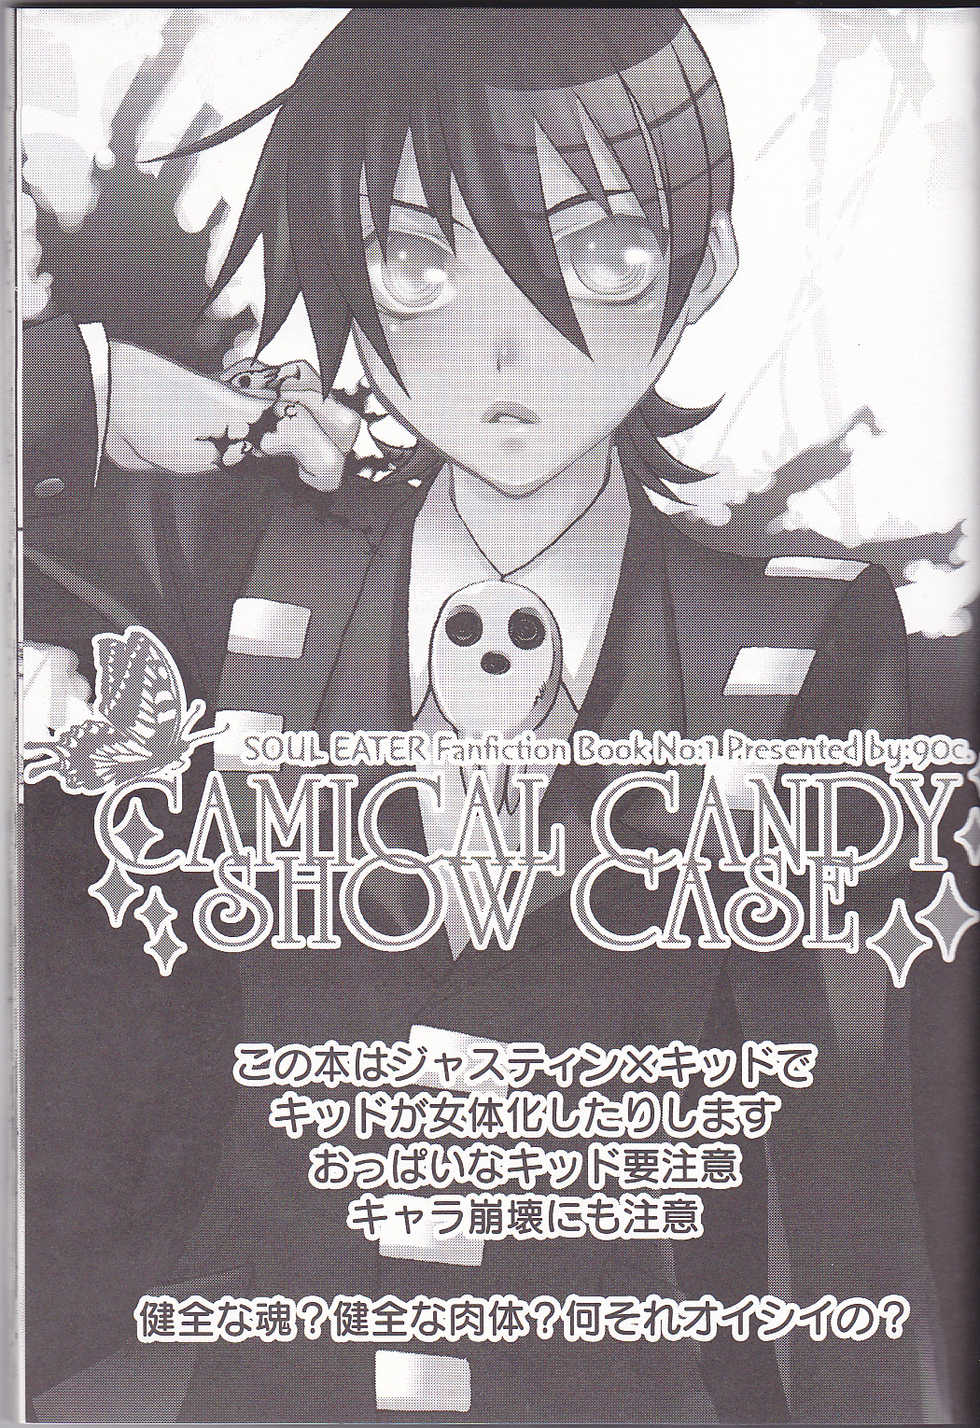 [90℃ (Suwo)] Camical Candy Show Case (Soul Eater) - Page 2